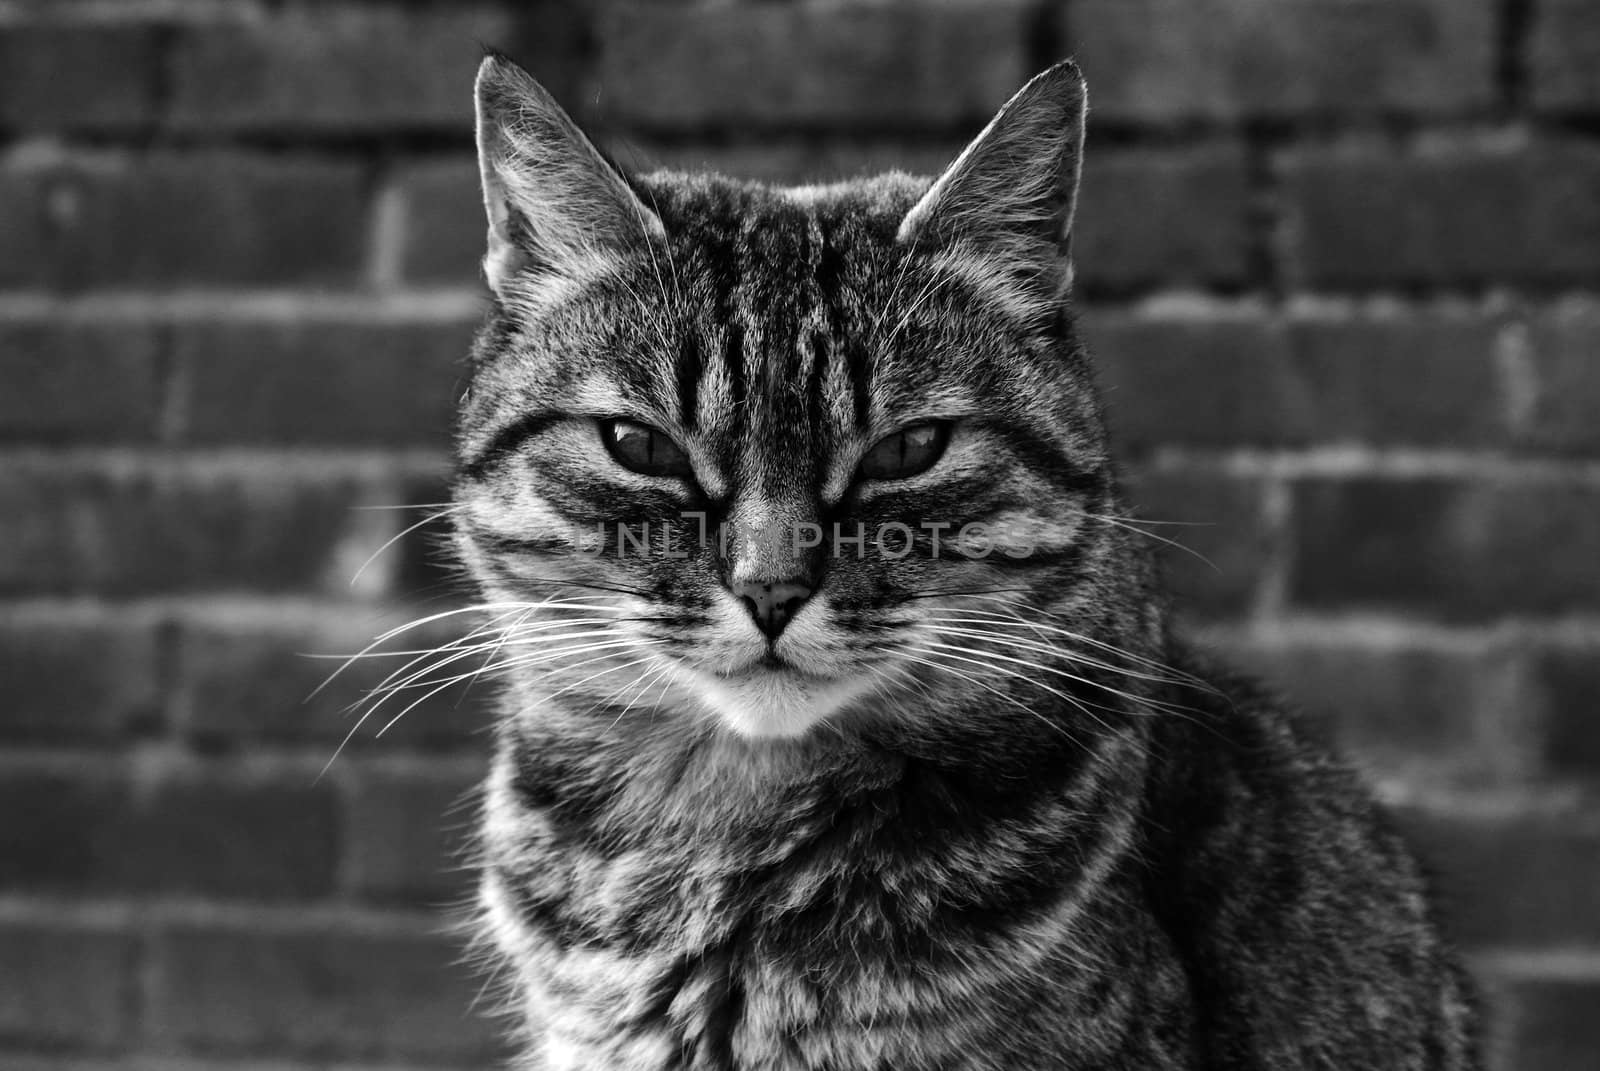 Cat in black and white portrait